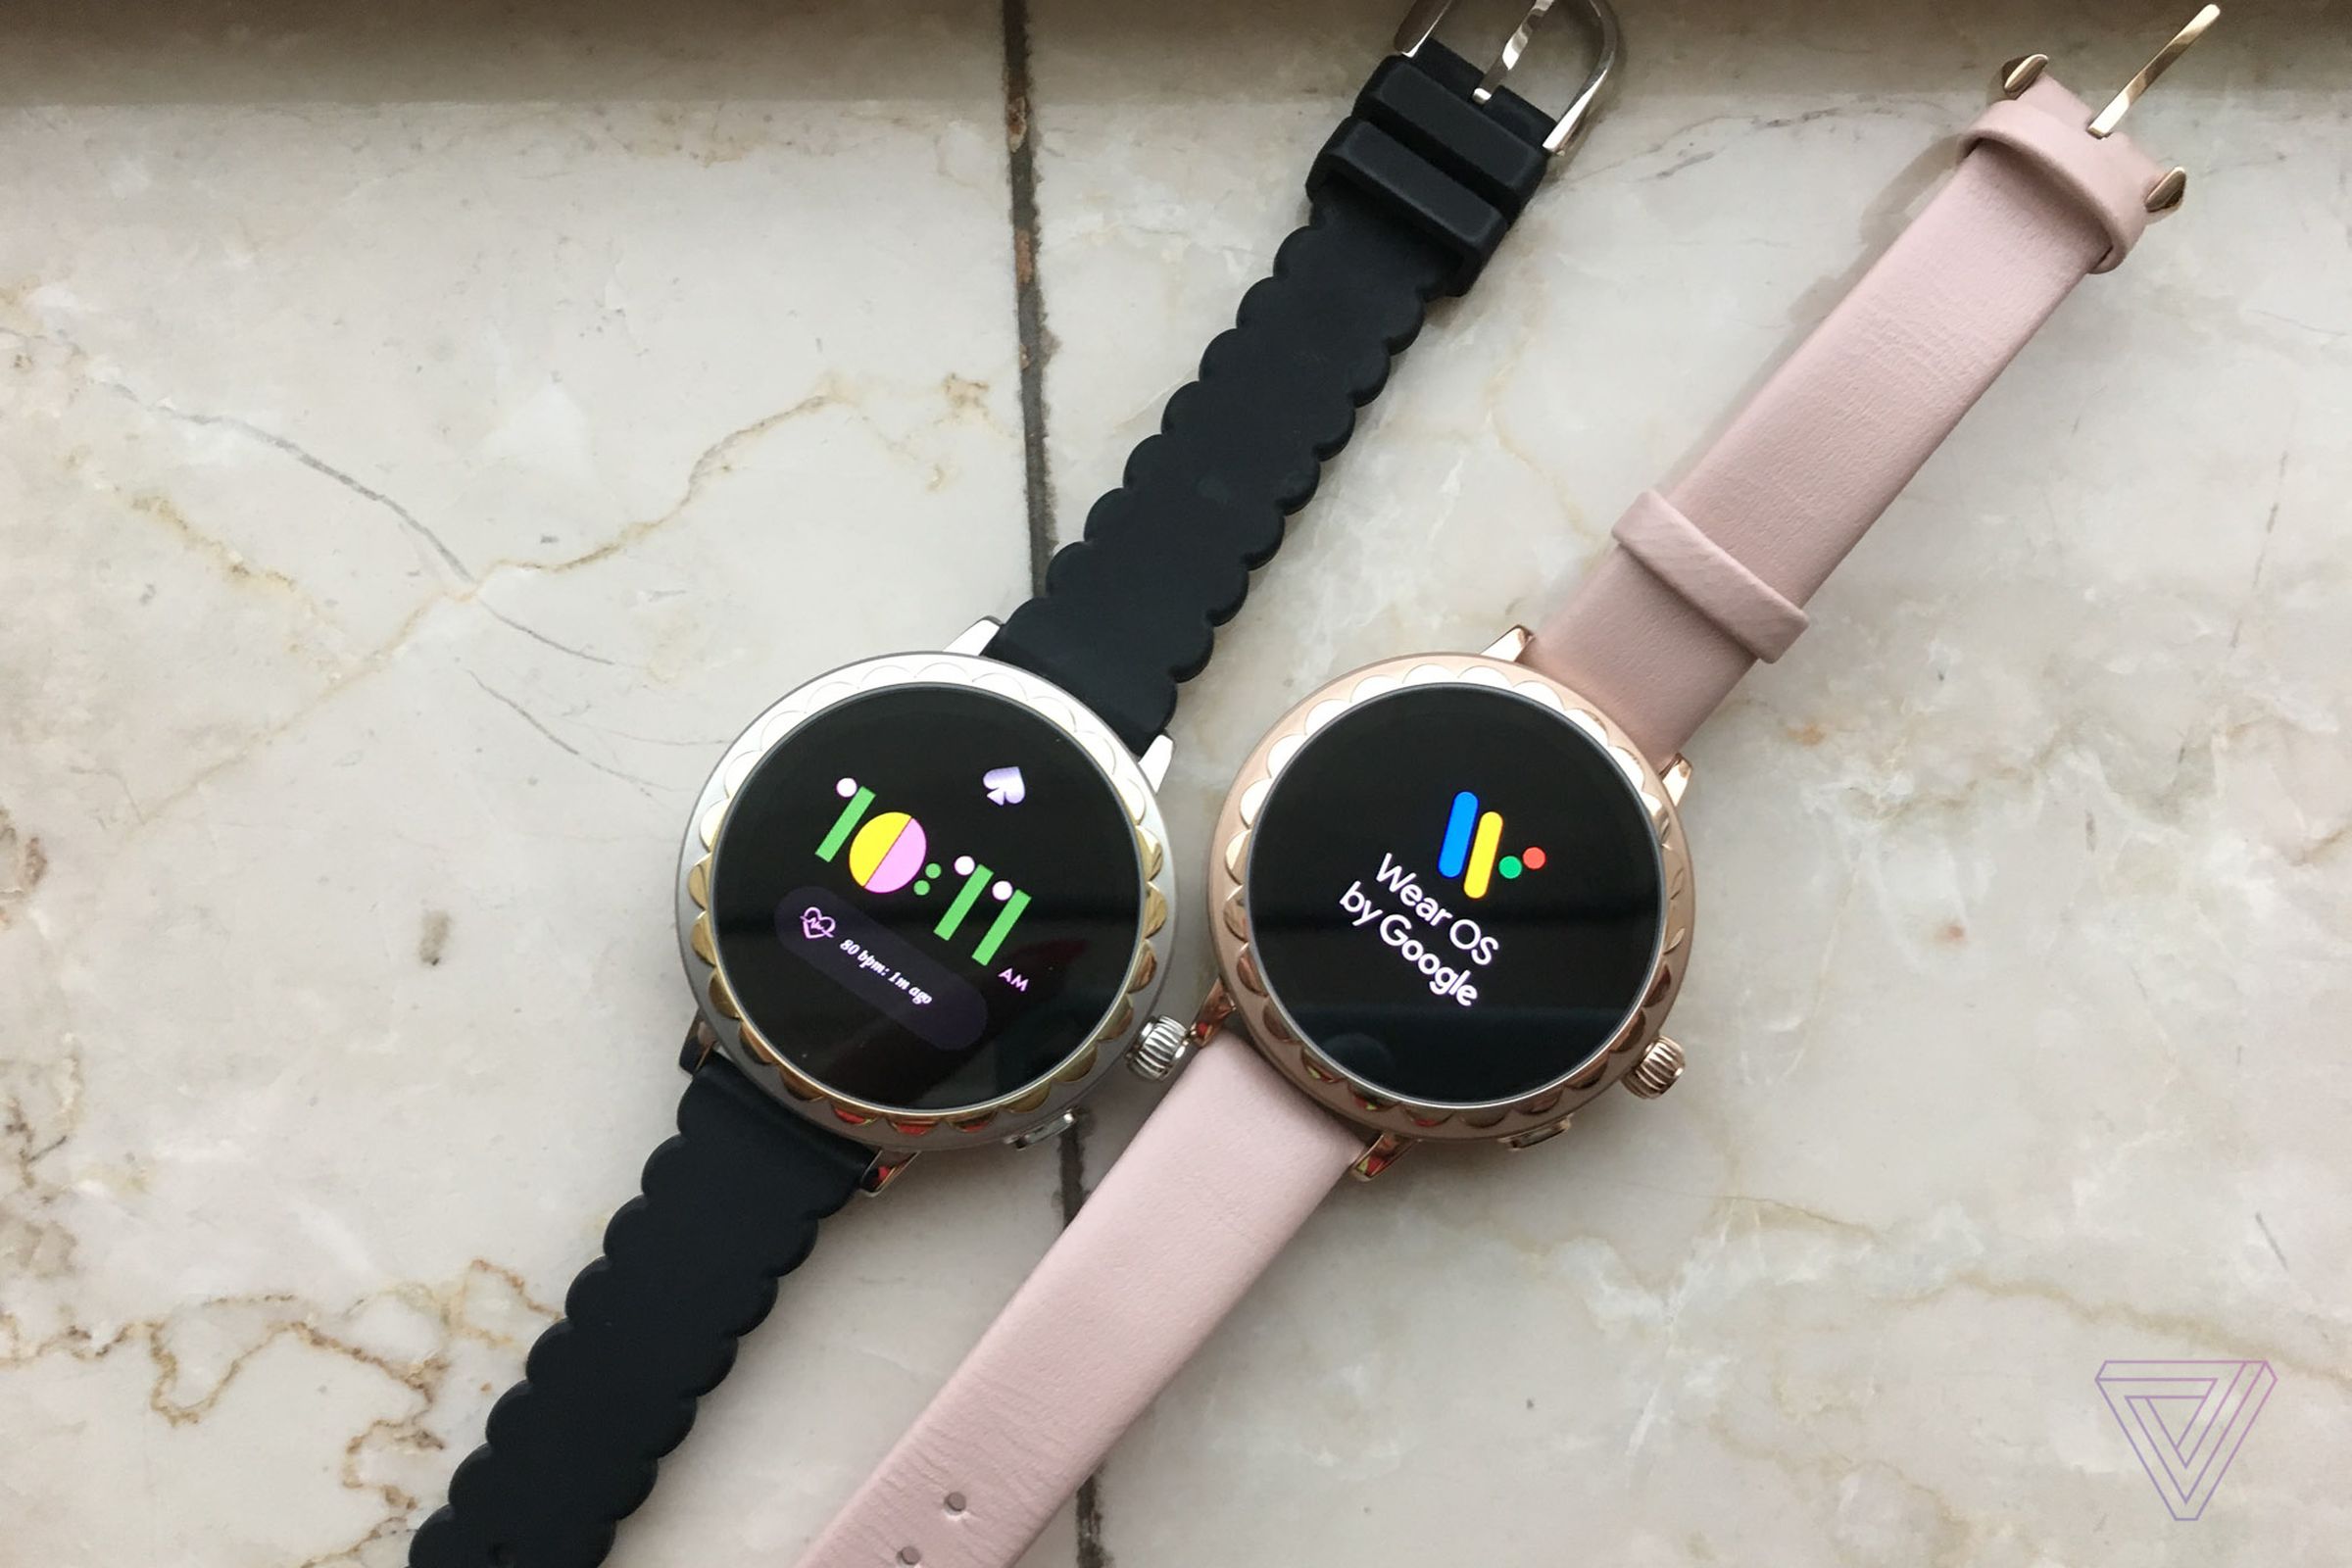 The Kate Spade Smartwatch 2.